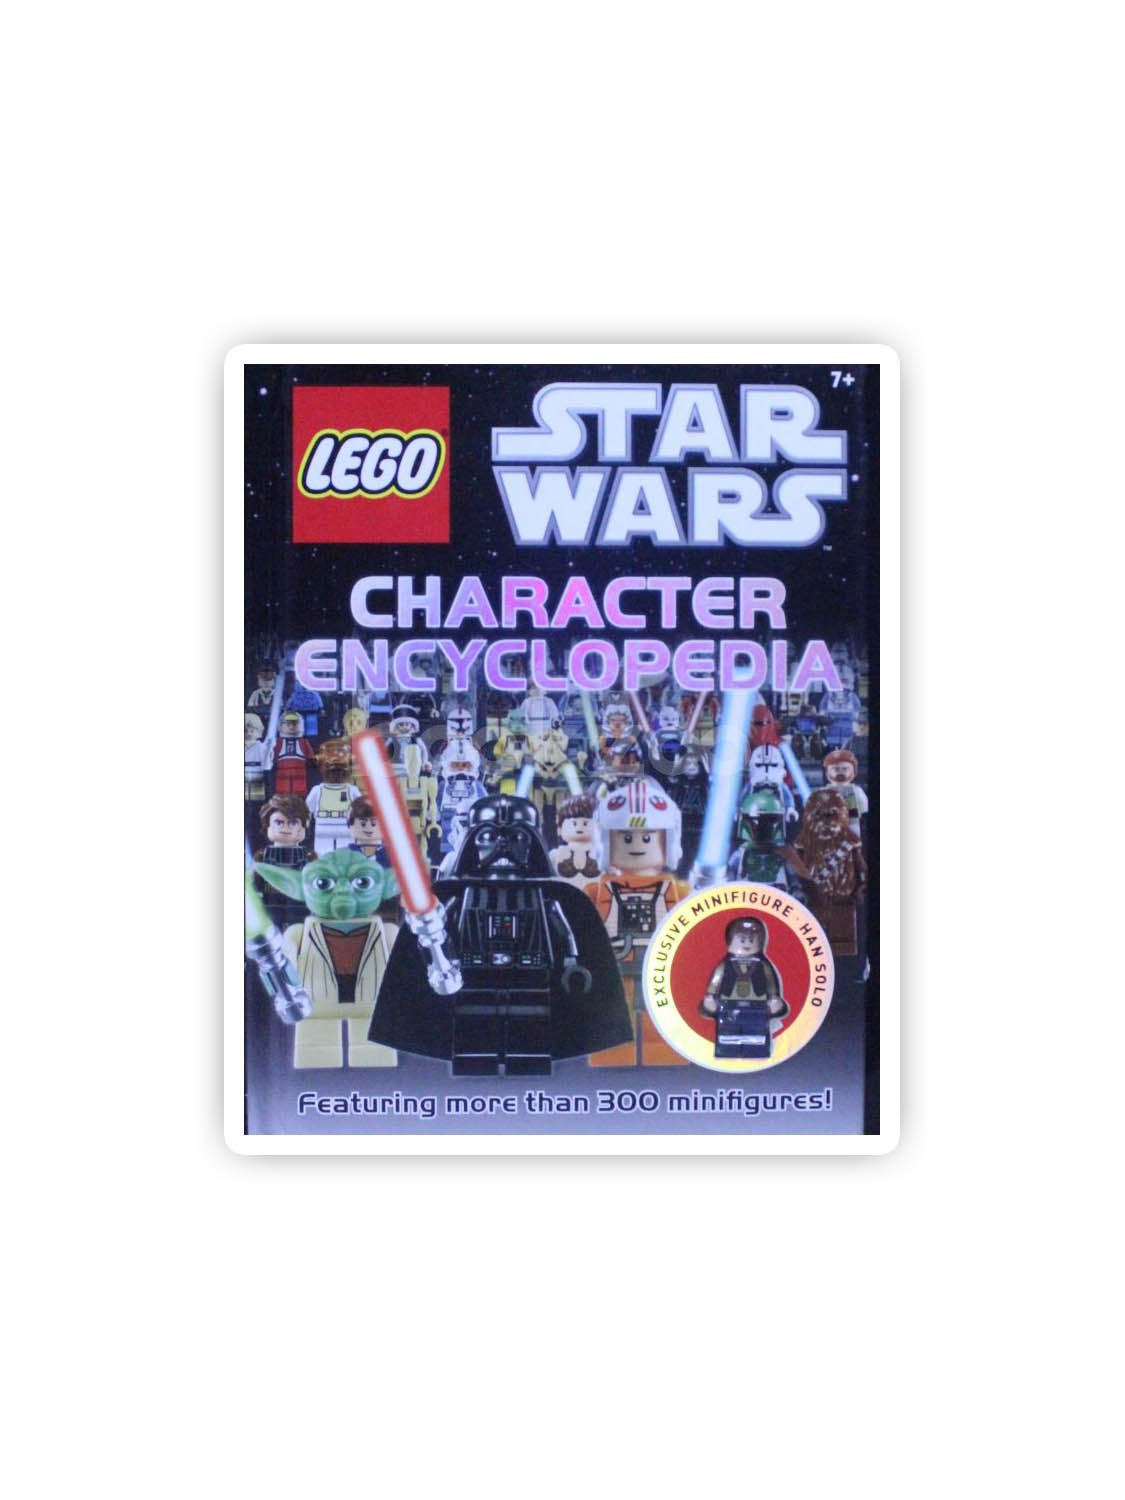 Star　bookstore　Lego　Buy　Character　Online　Hannah　at　Wars:　Dolan　by　Encyclopedia.　—